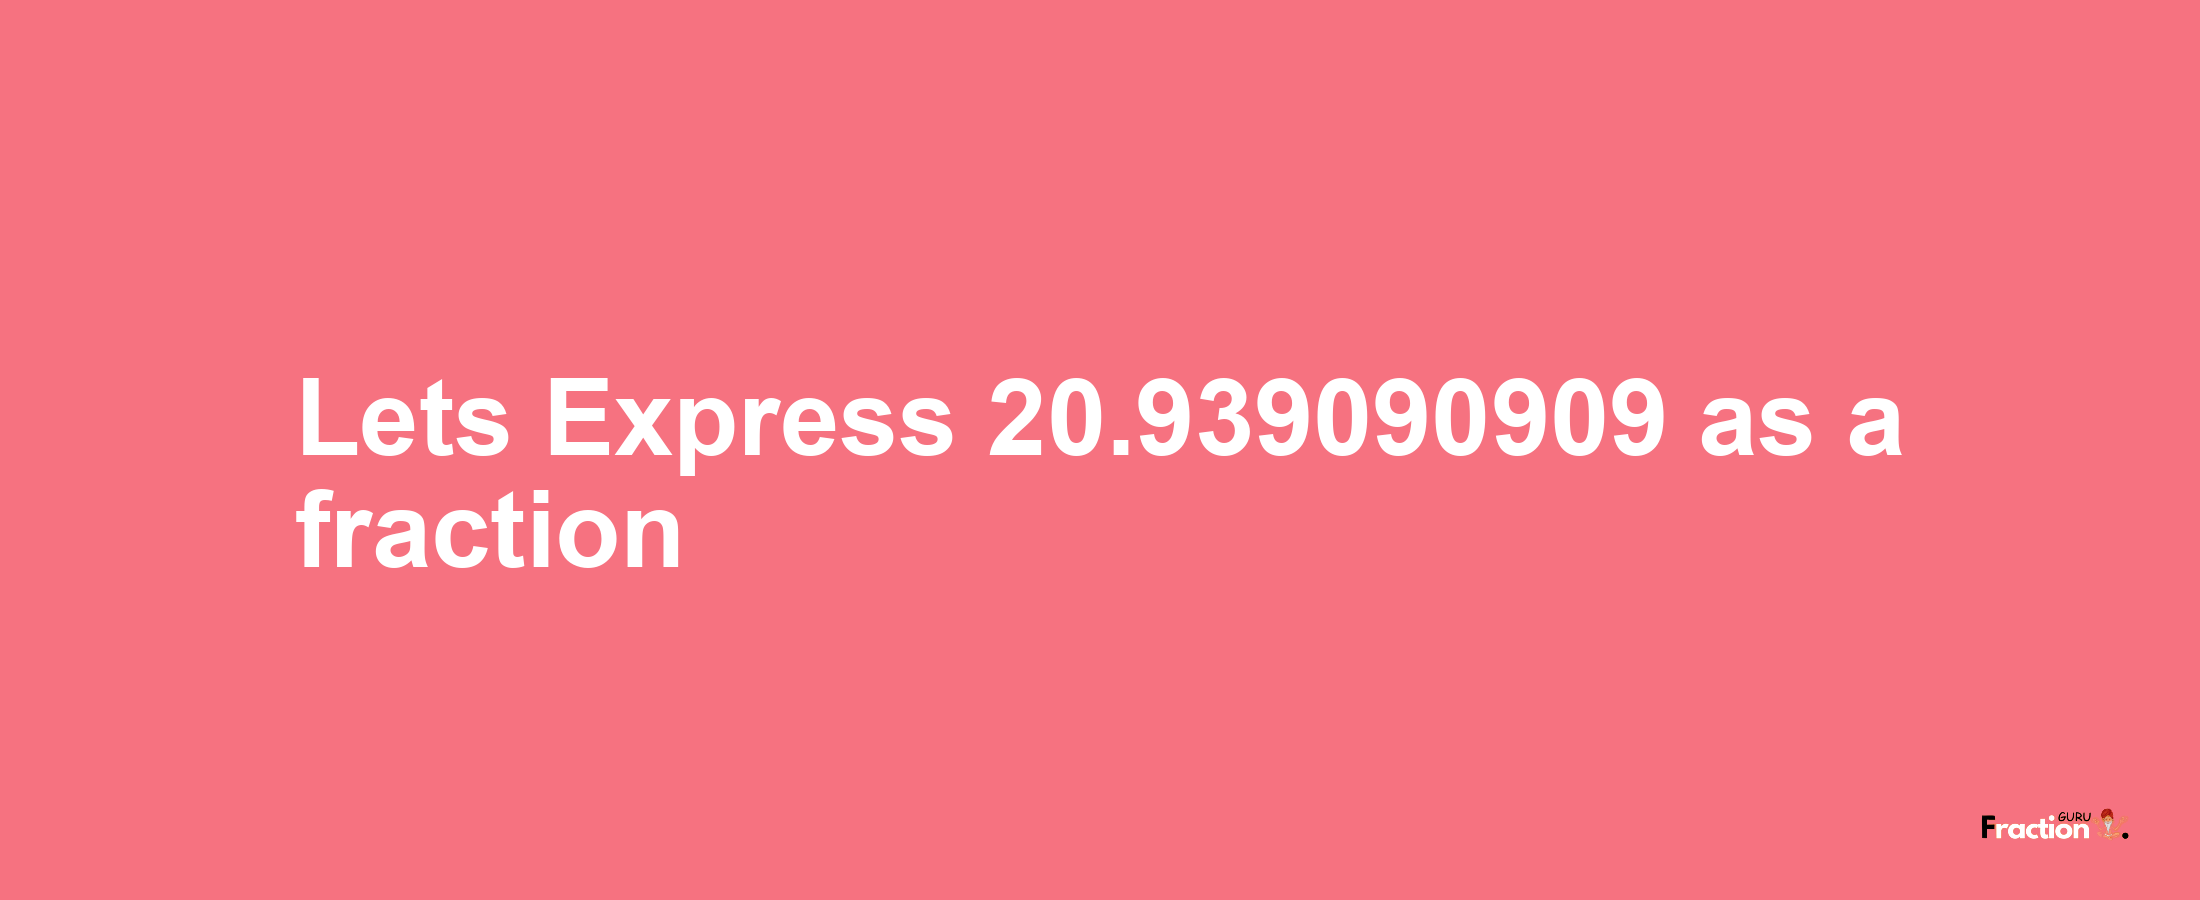 Lets Express 20.939090909 as afraction